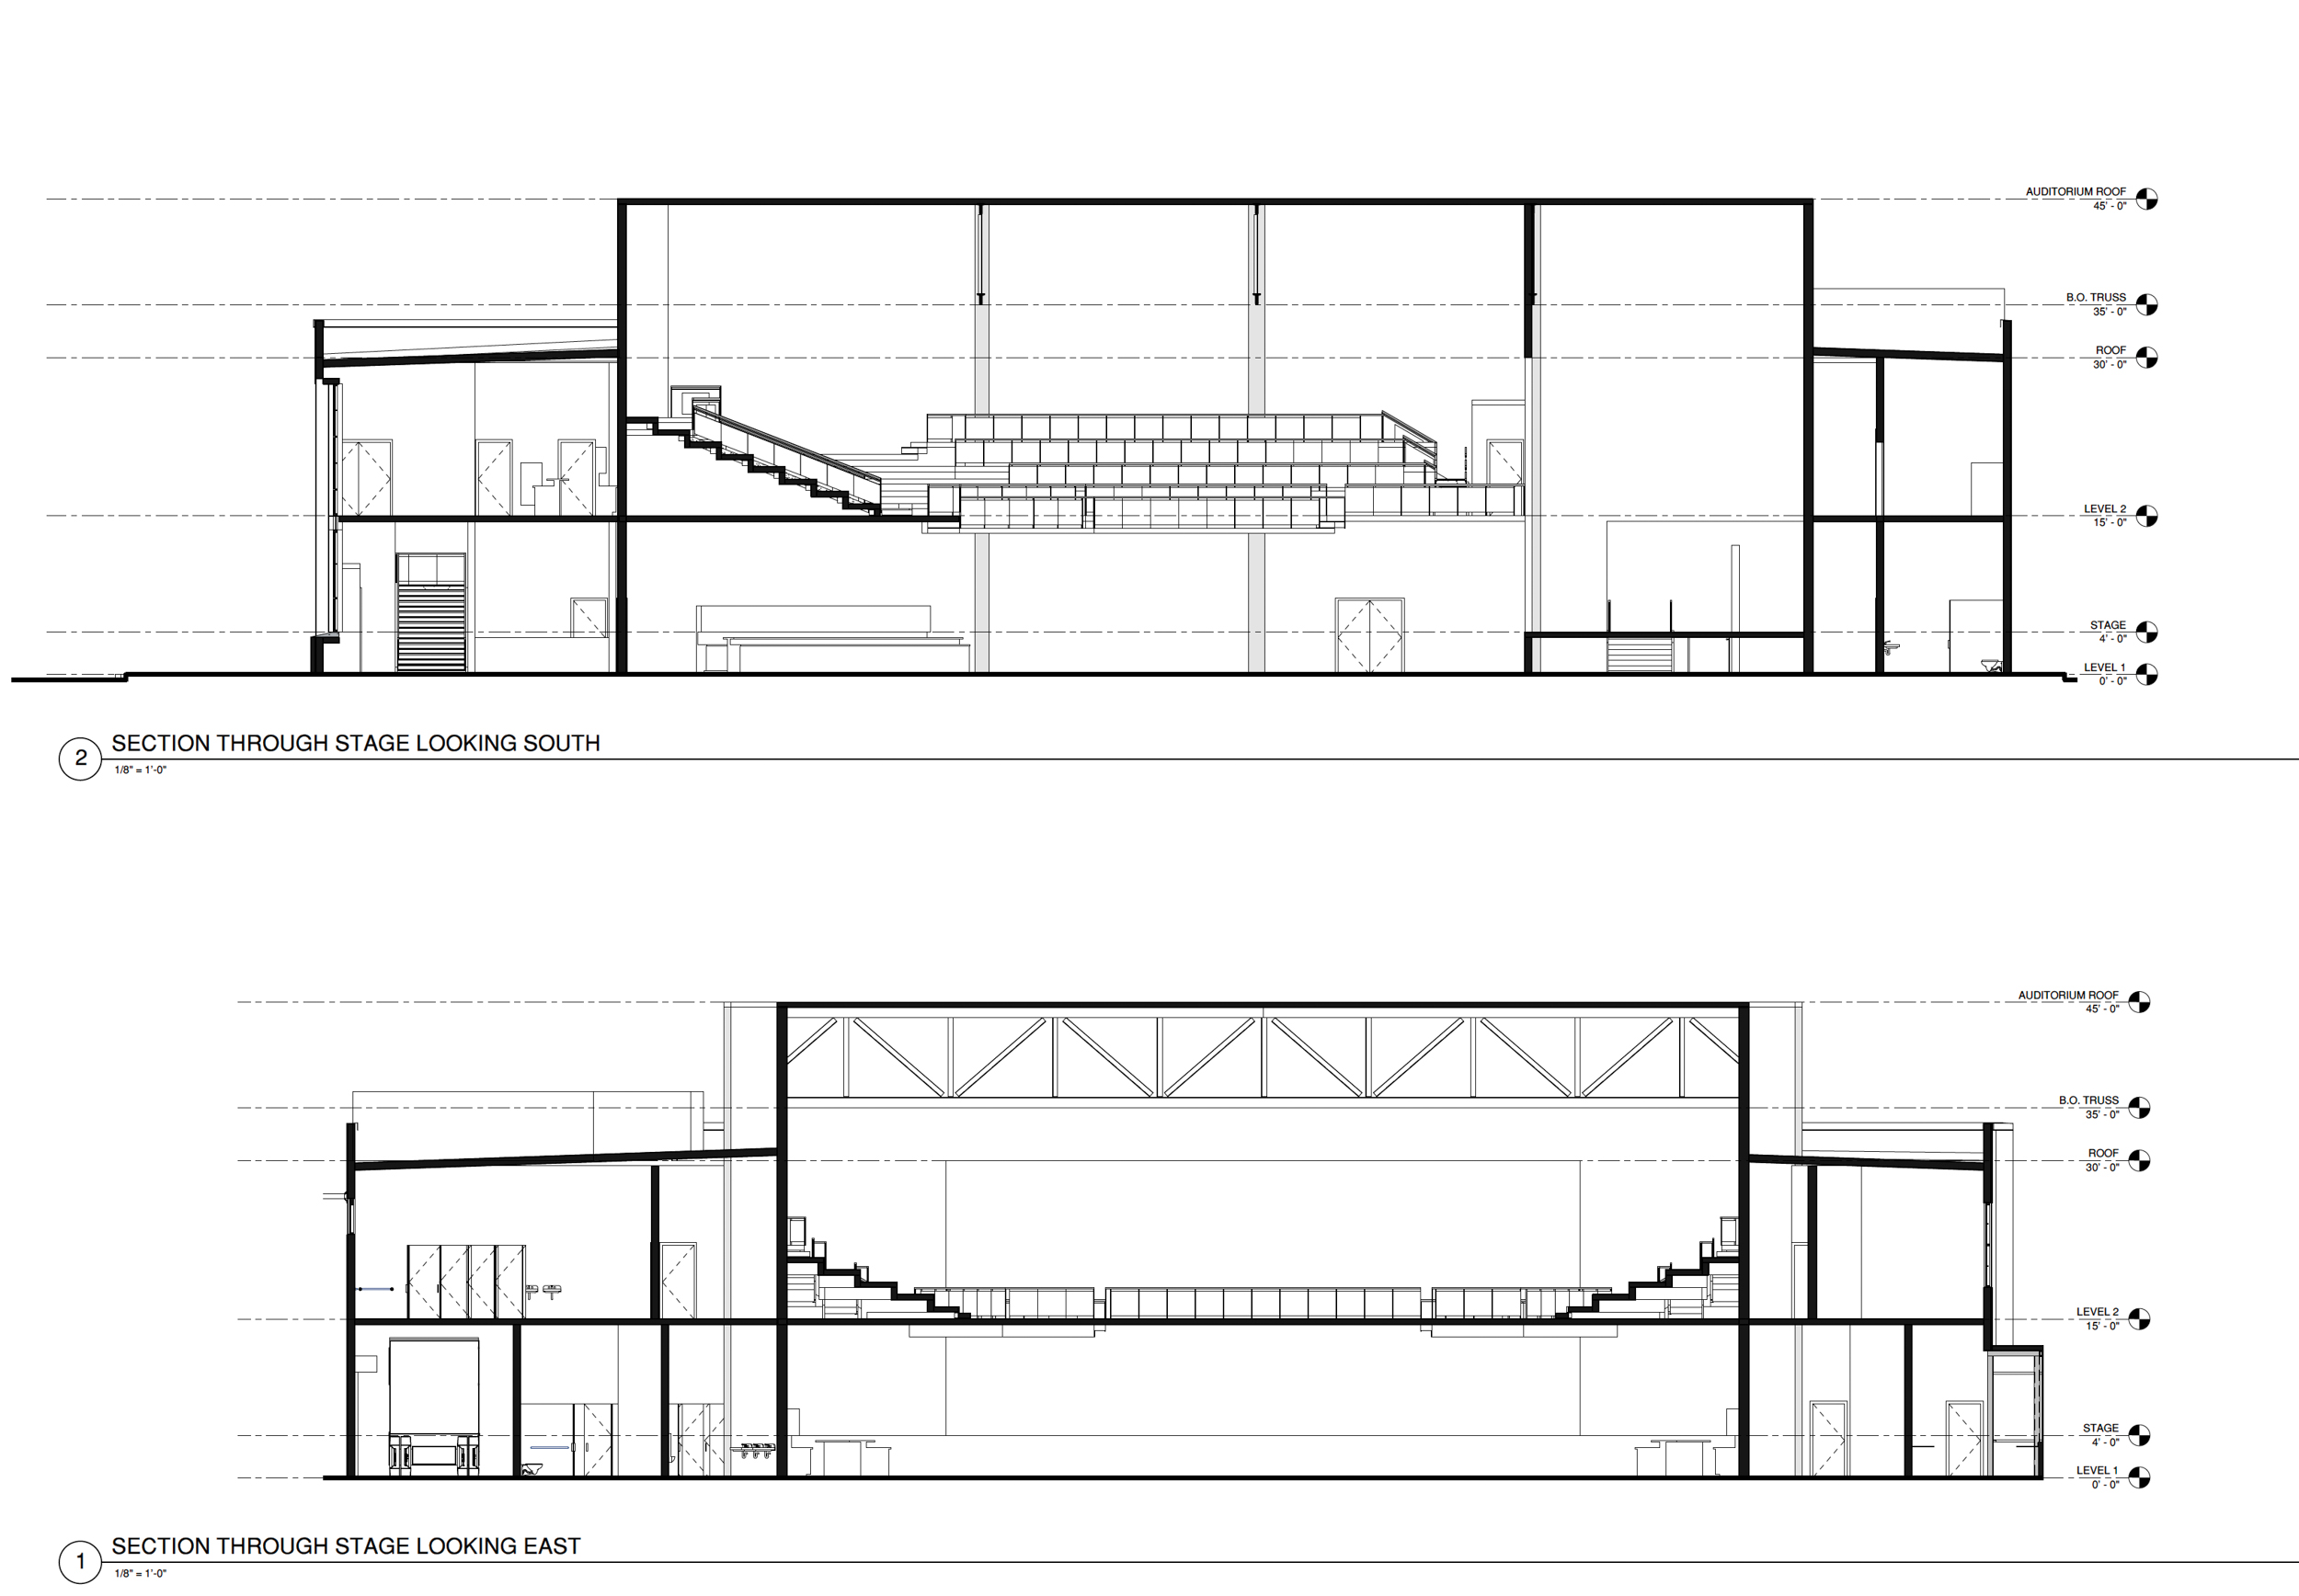 24R Theater at 1800 24th Street vertical cross section, illustration via CAW and Ellis Architects